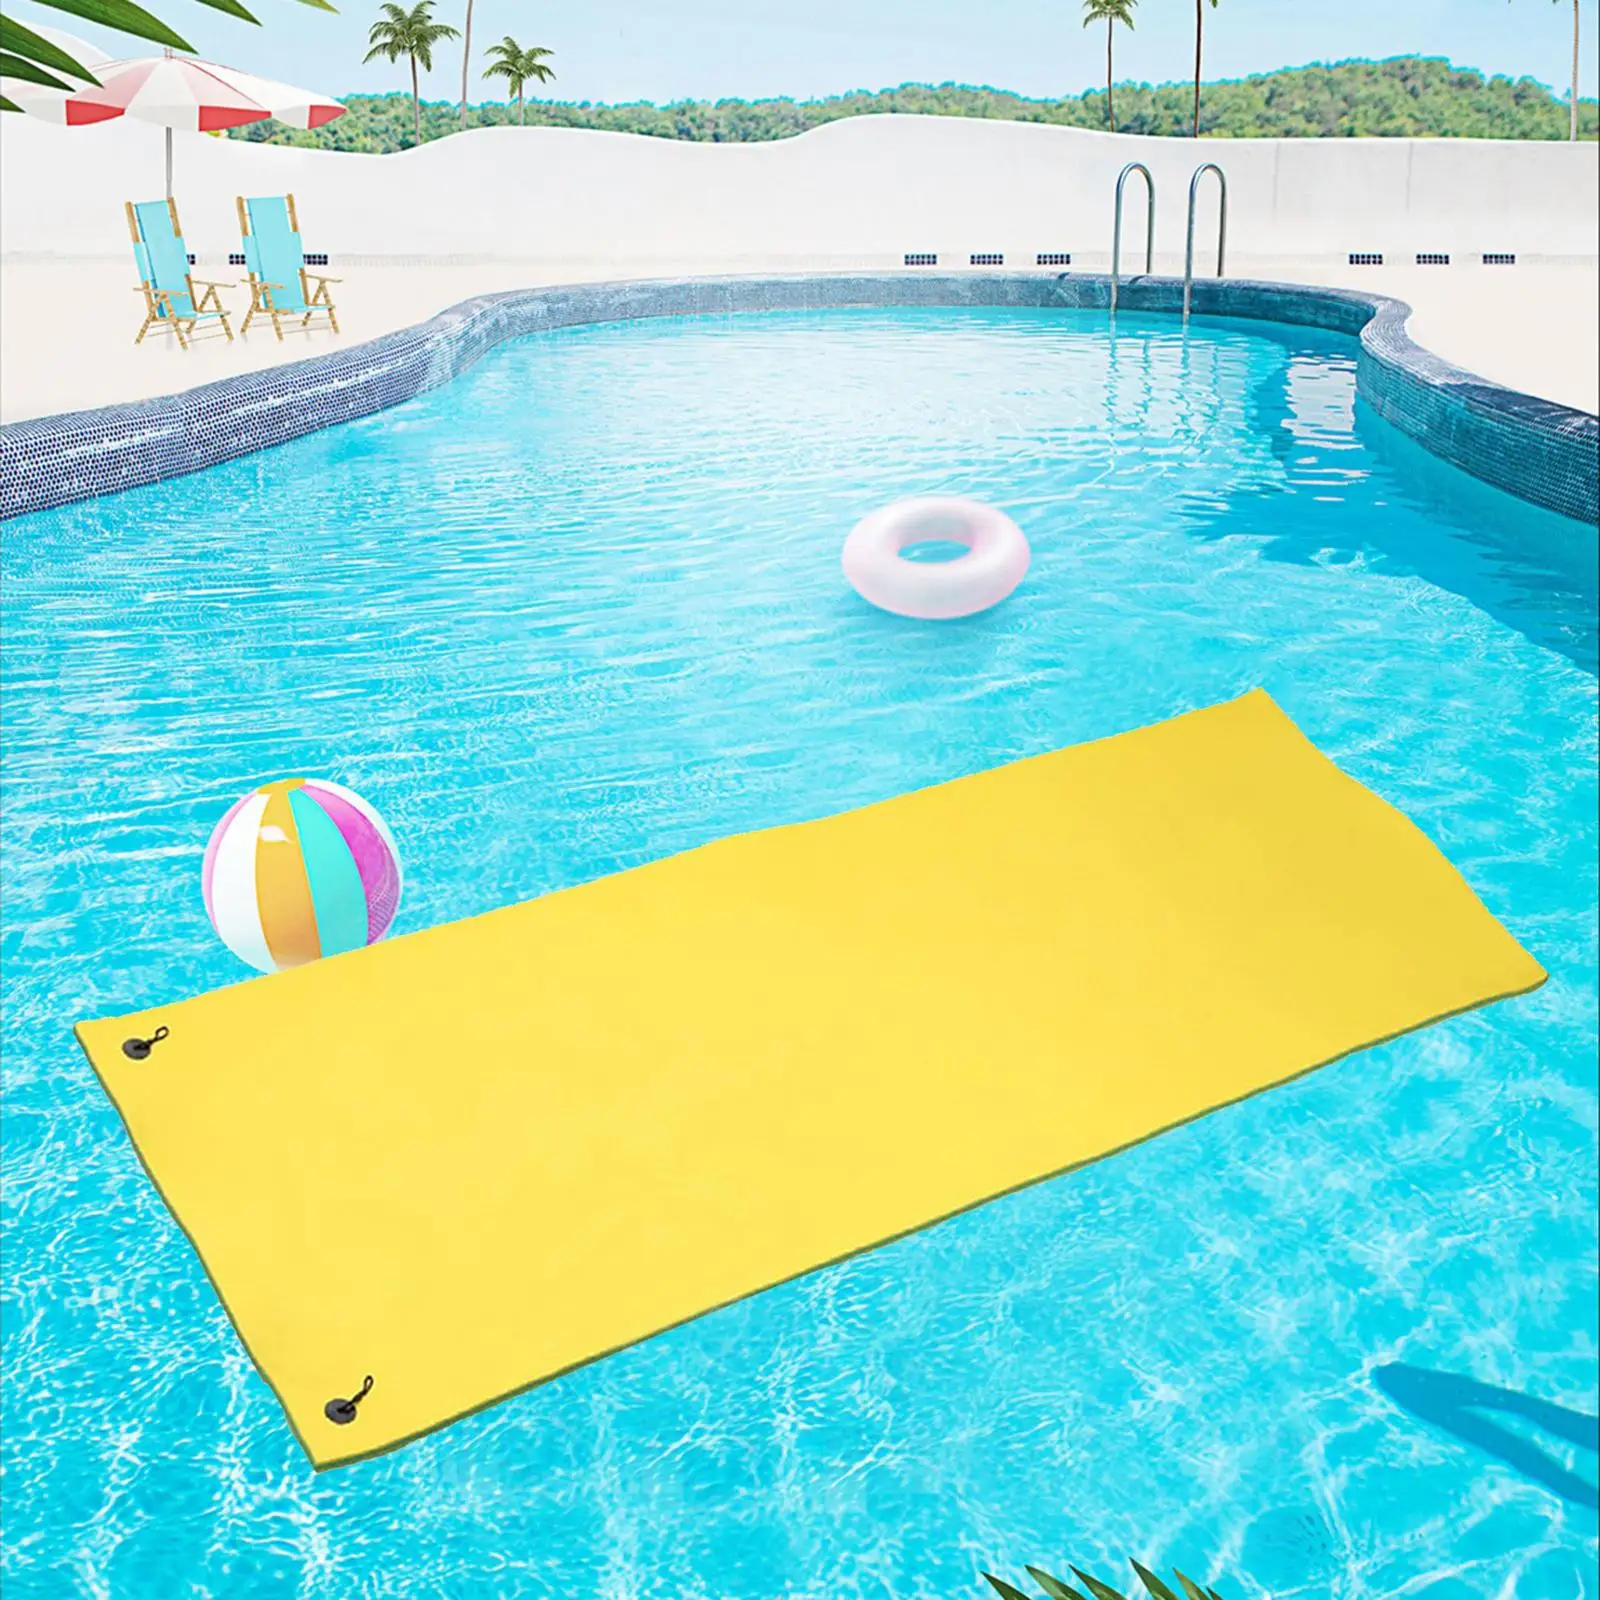 Pool Water Floating Mat 3 Layer Water Raft 106x35.4x1.3inch Simple to Clean with Soap and Water for Relaxation Roll up Pad